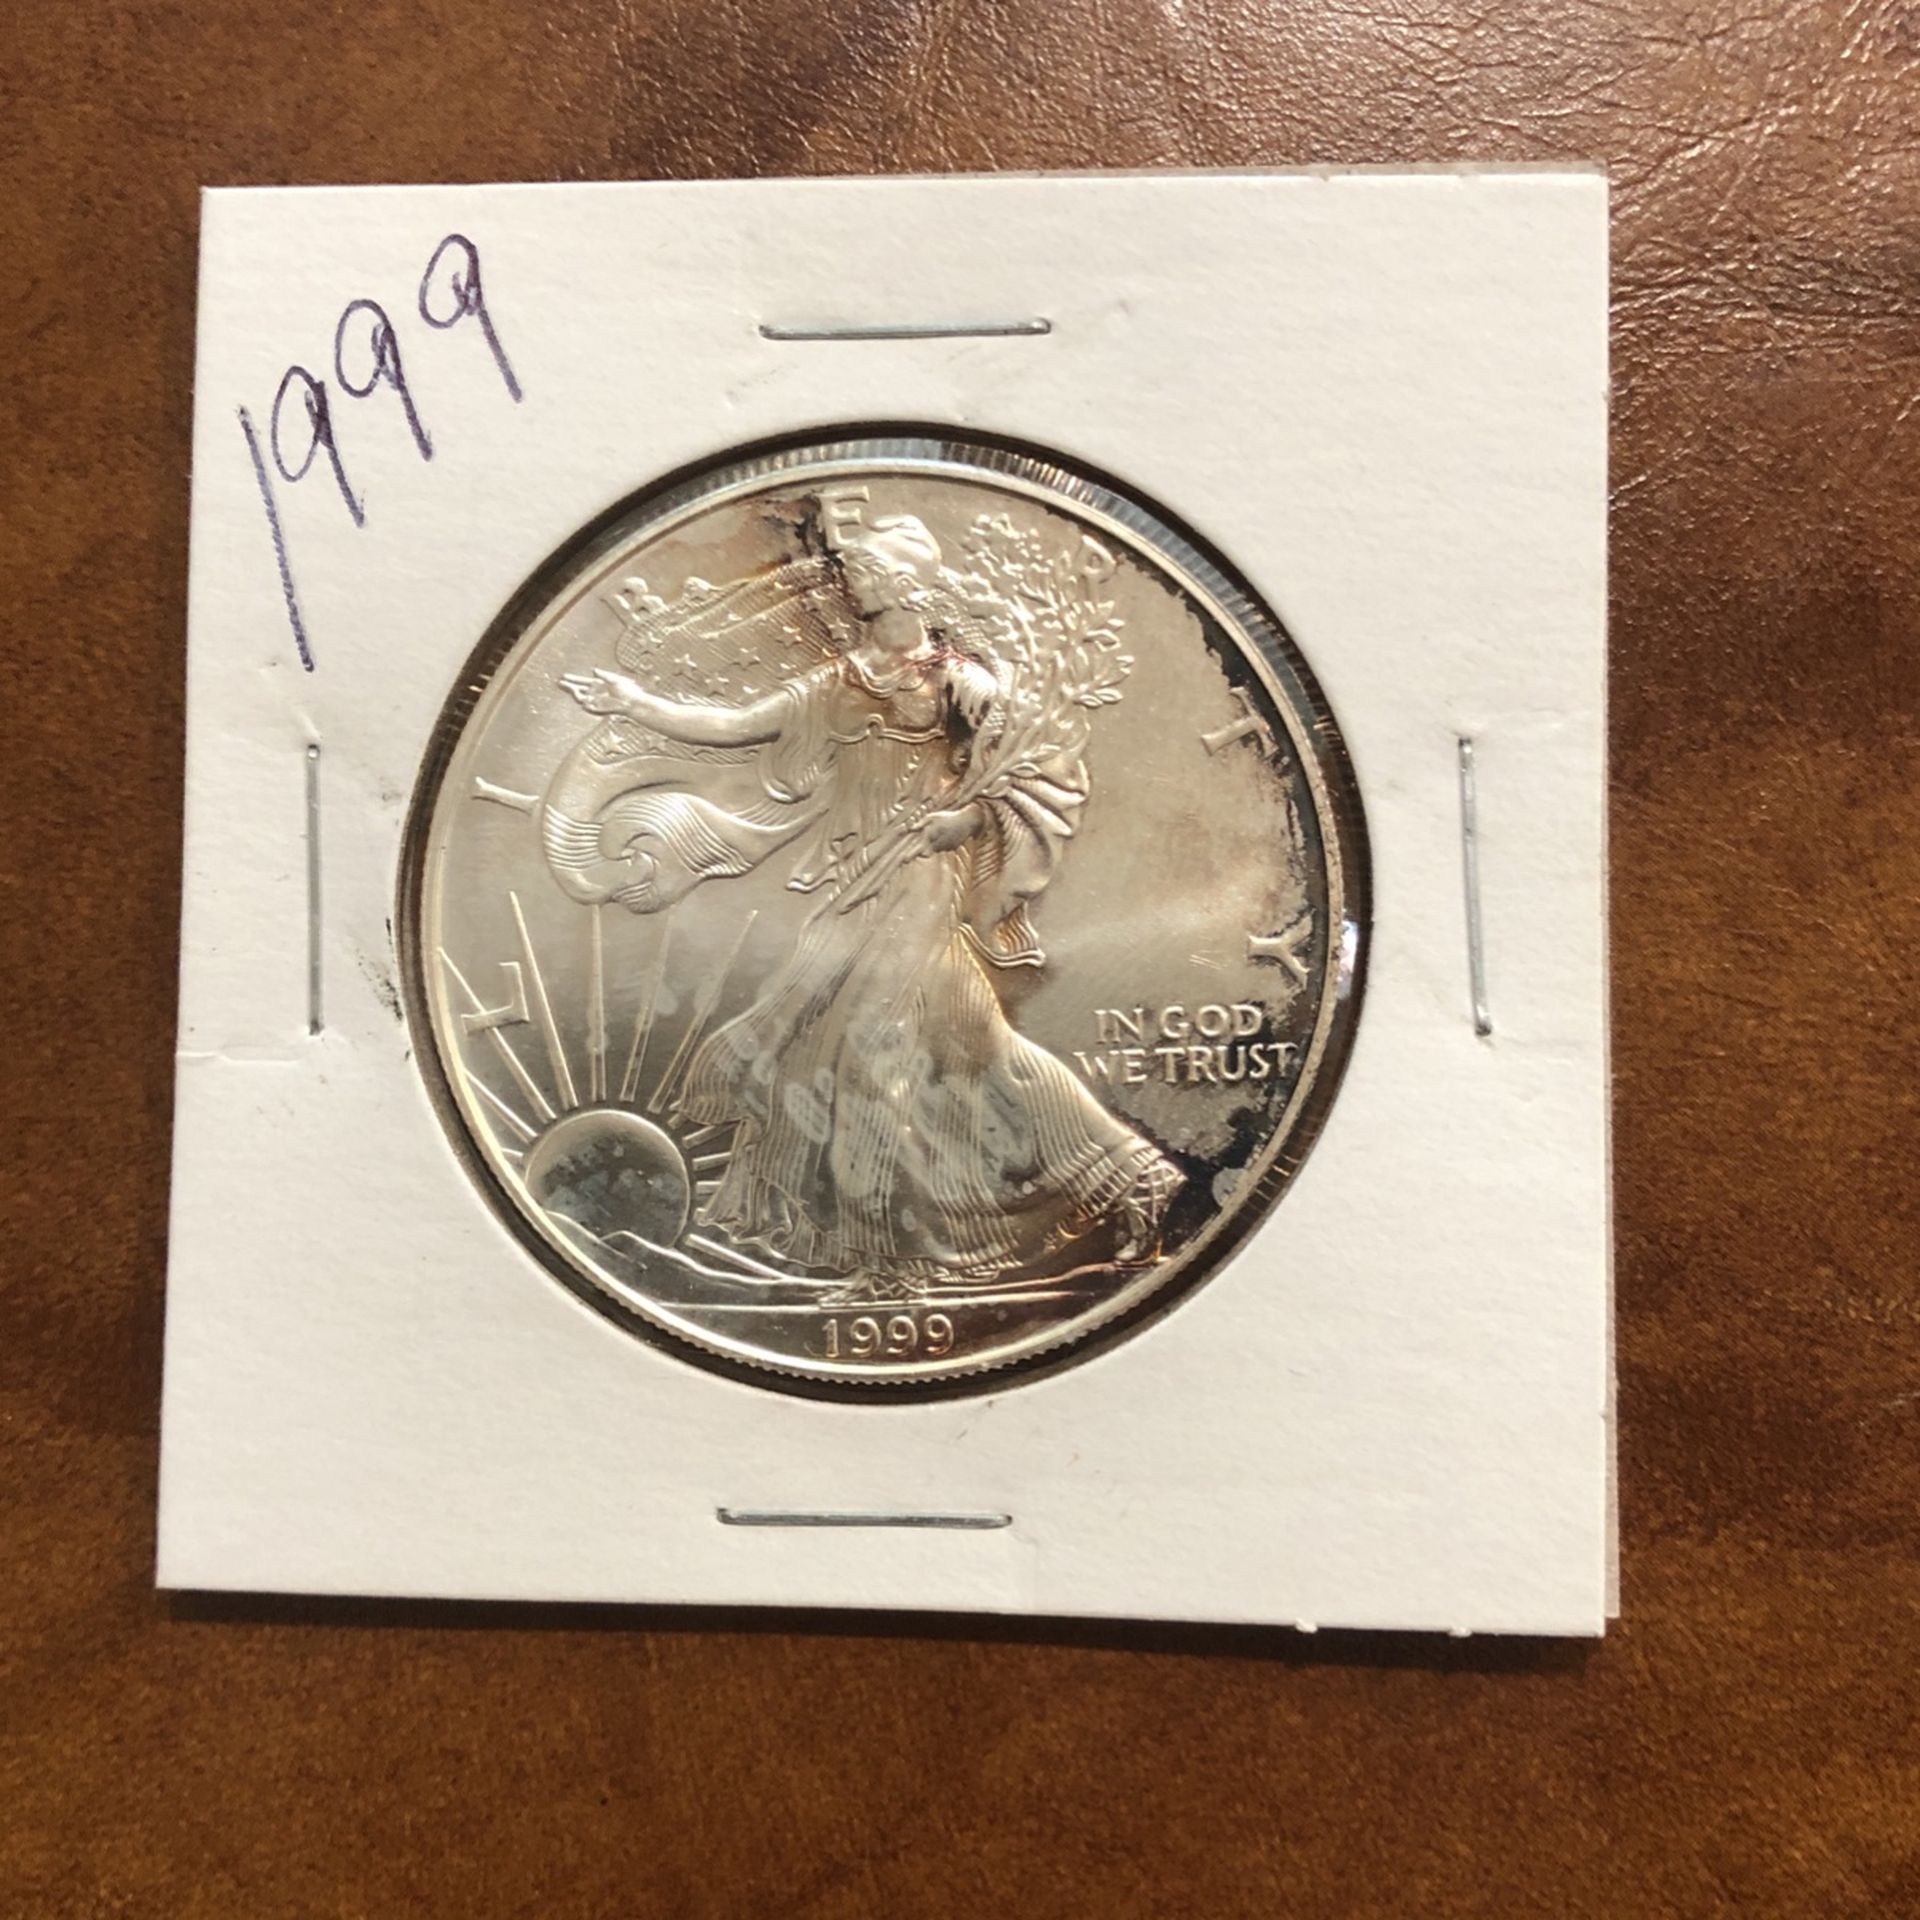 American eagle silver dollar coin for sale